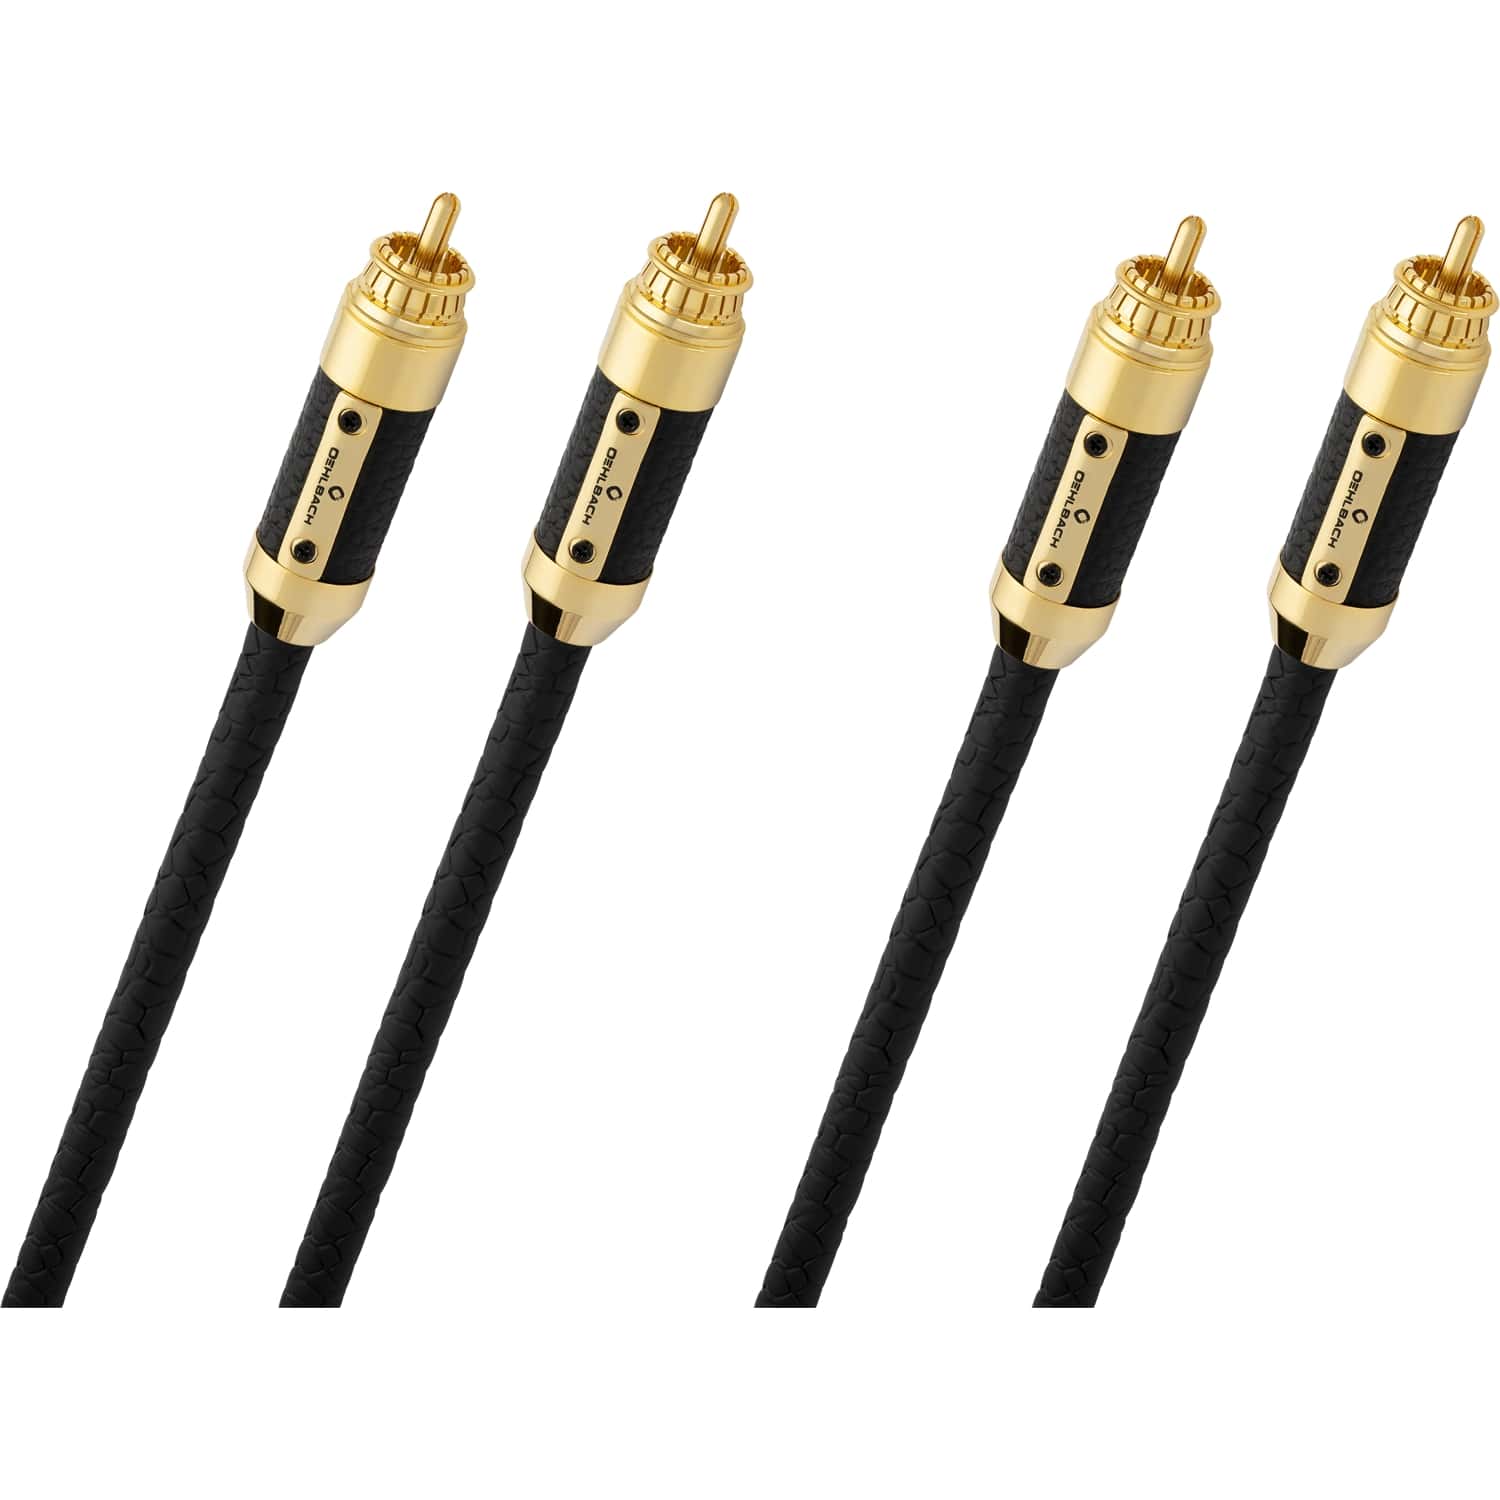 Кабели межблочные аудио Oehlbach STATE OF THE ART XXL Black Connection Cable RCA, 2x1,50m, gold кабели межблочные аудио oehlbach state of the art xxl cable rca 2x1 50m gold d1c13114